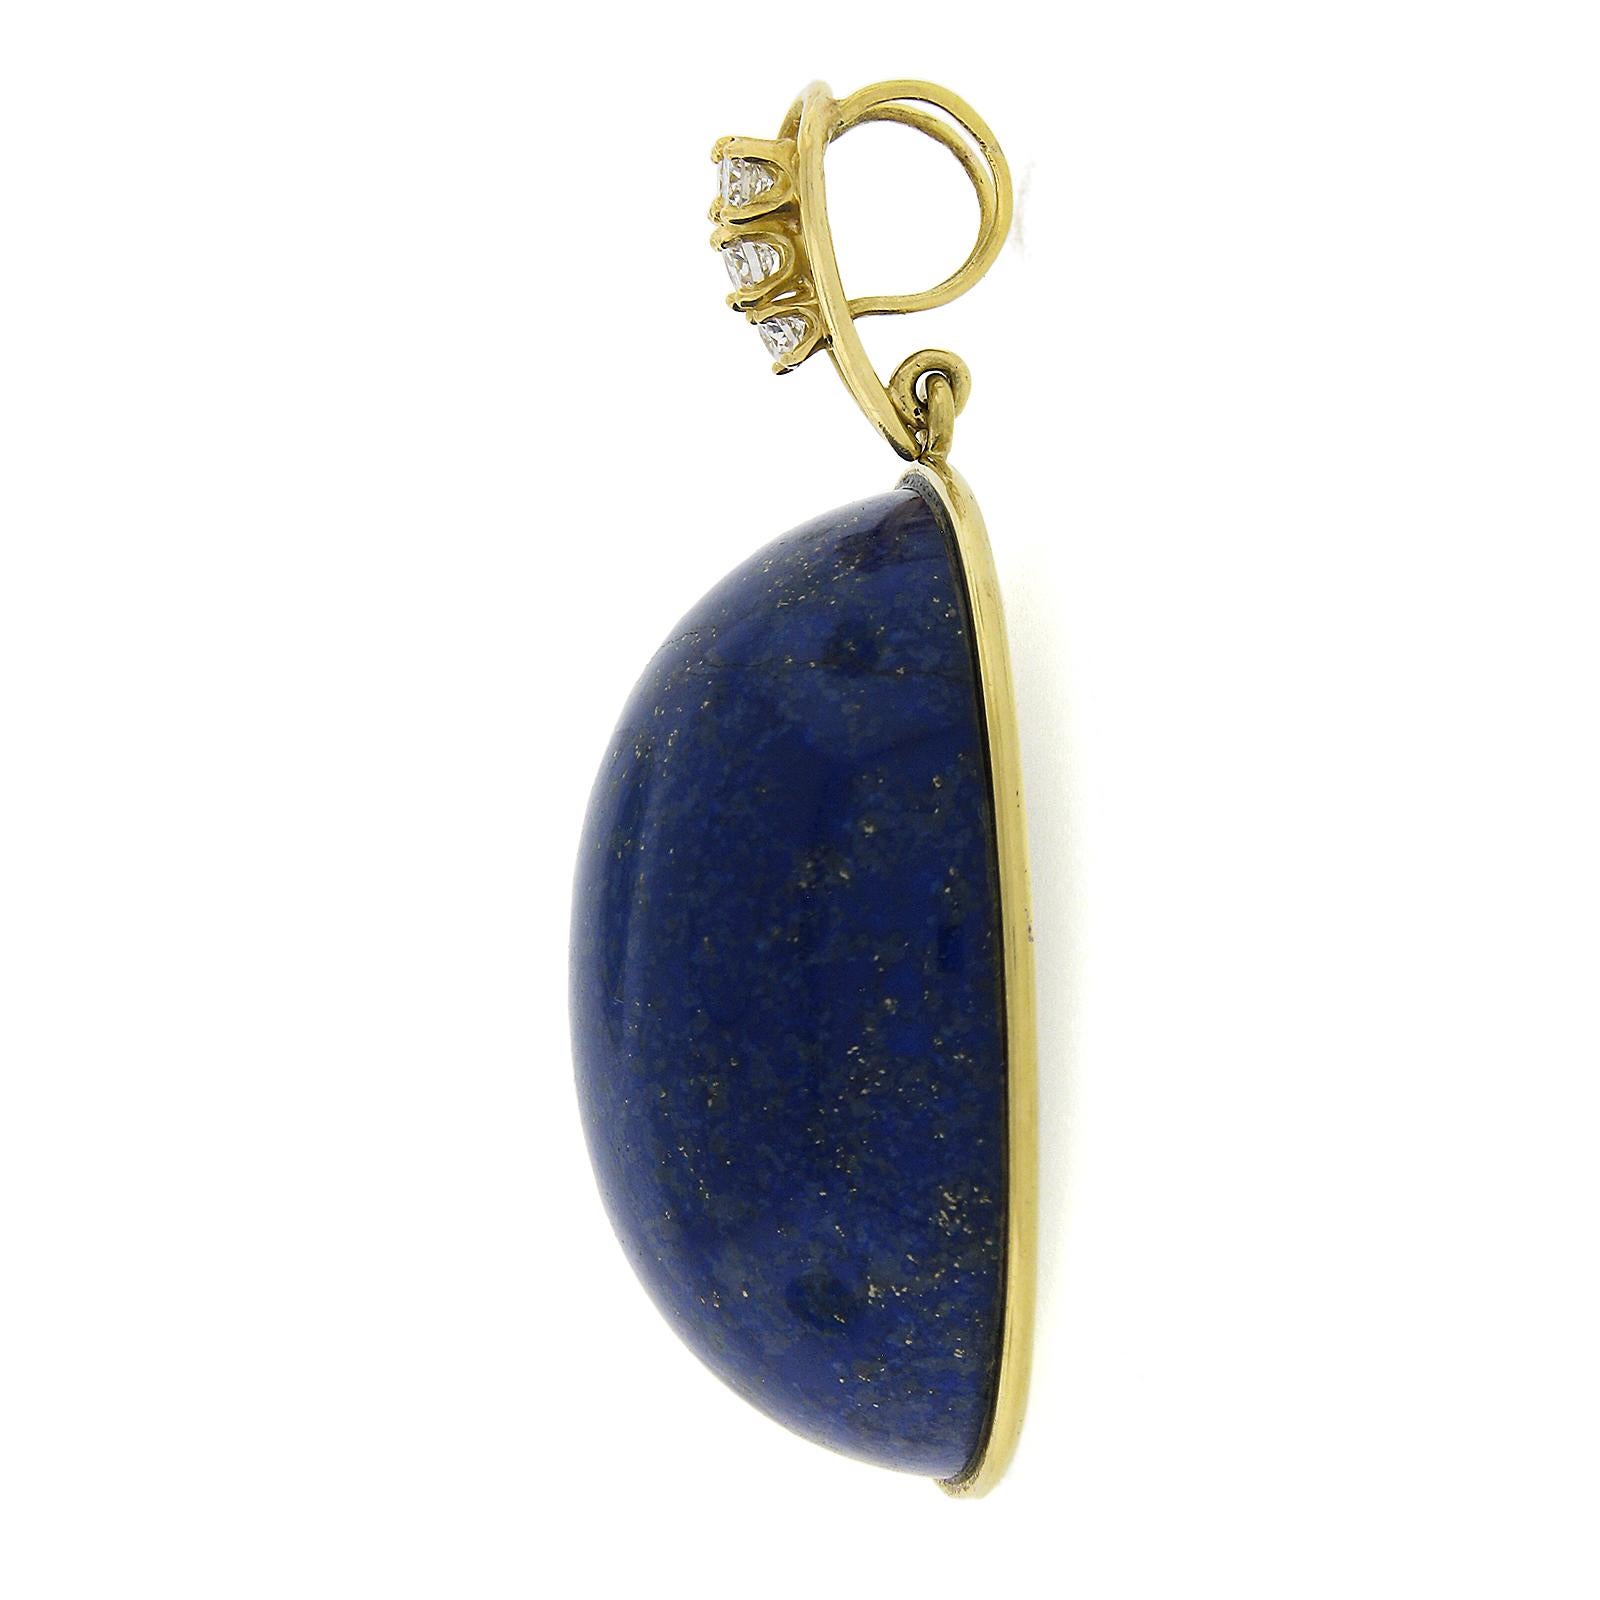 Vintage Handmade Yellow Gold Domed Oval Polished Lapis w/ Diamond Bail Pendant In Excellent Condition For Sale In Montclair, NJ